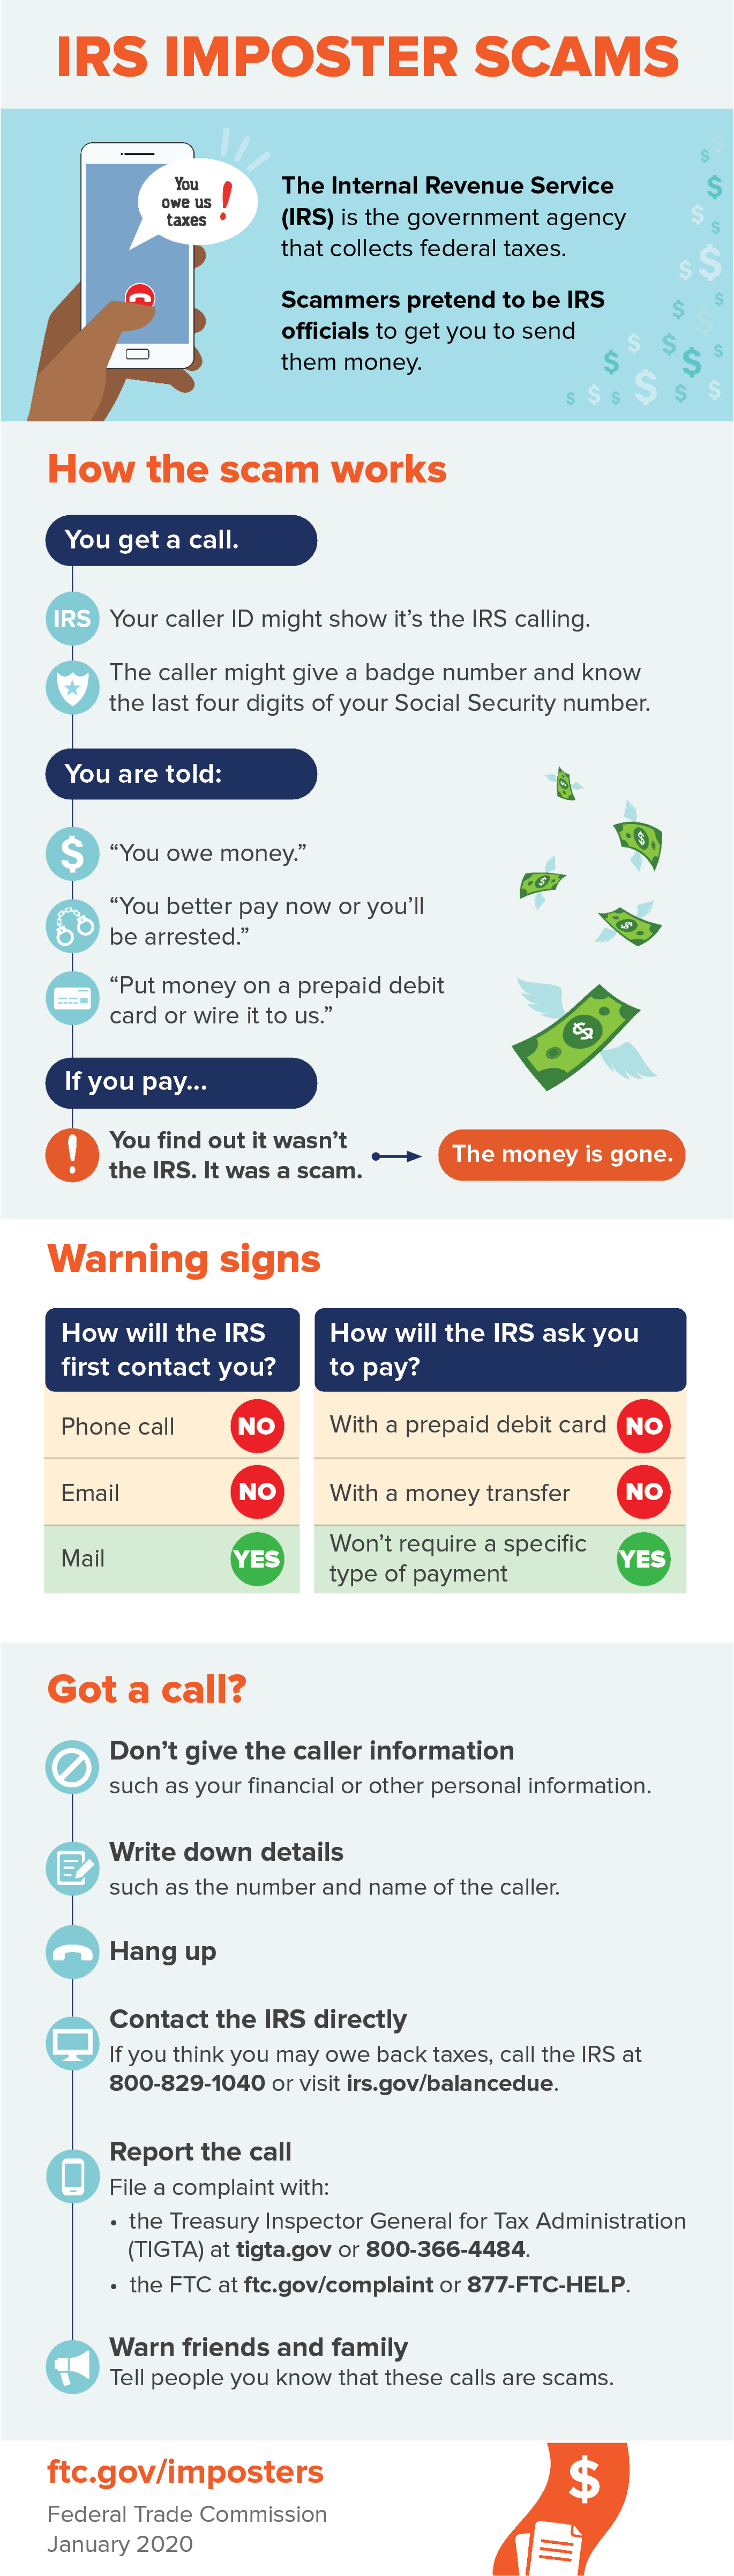 IRS Imposter Scams infographic